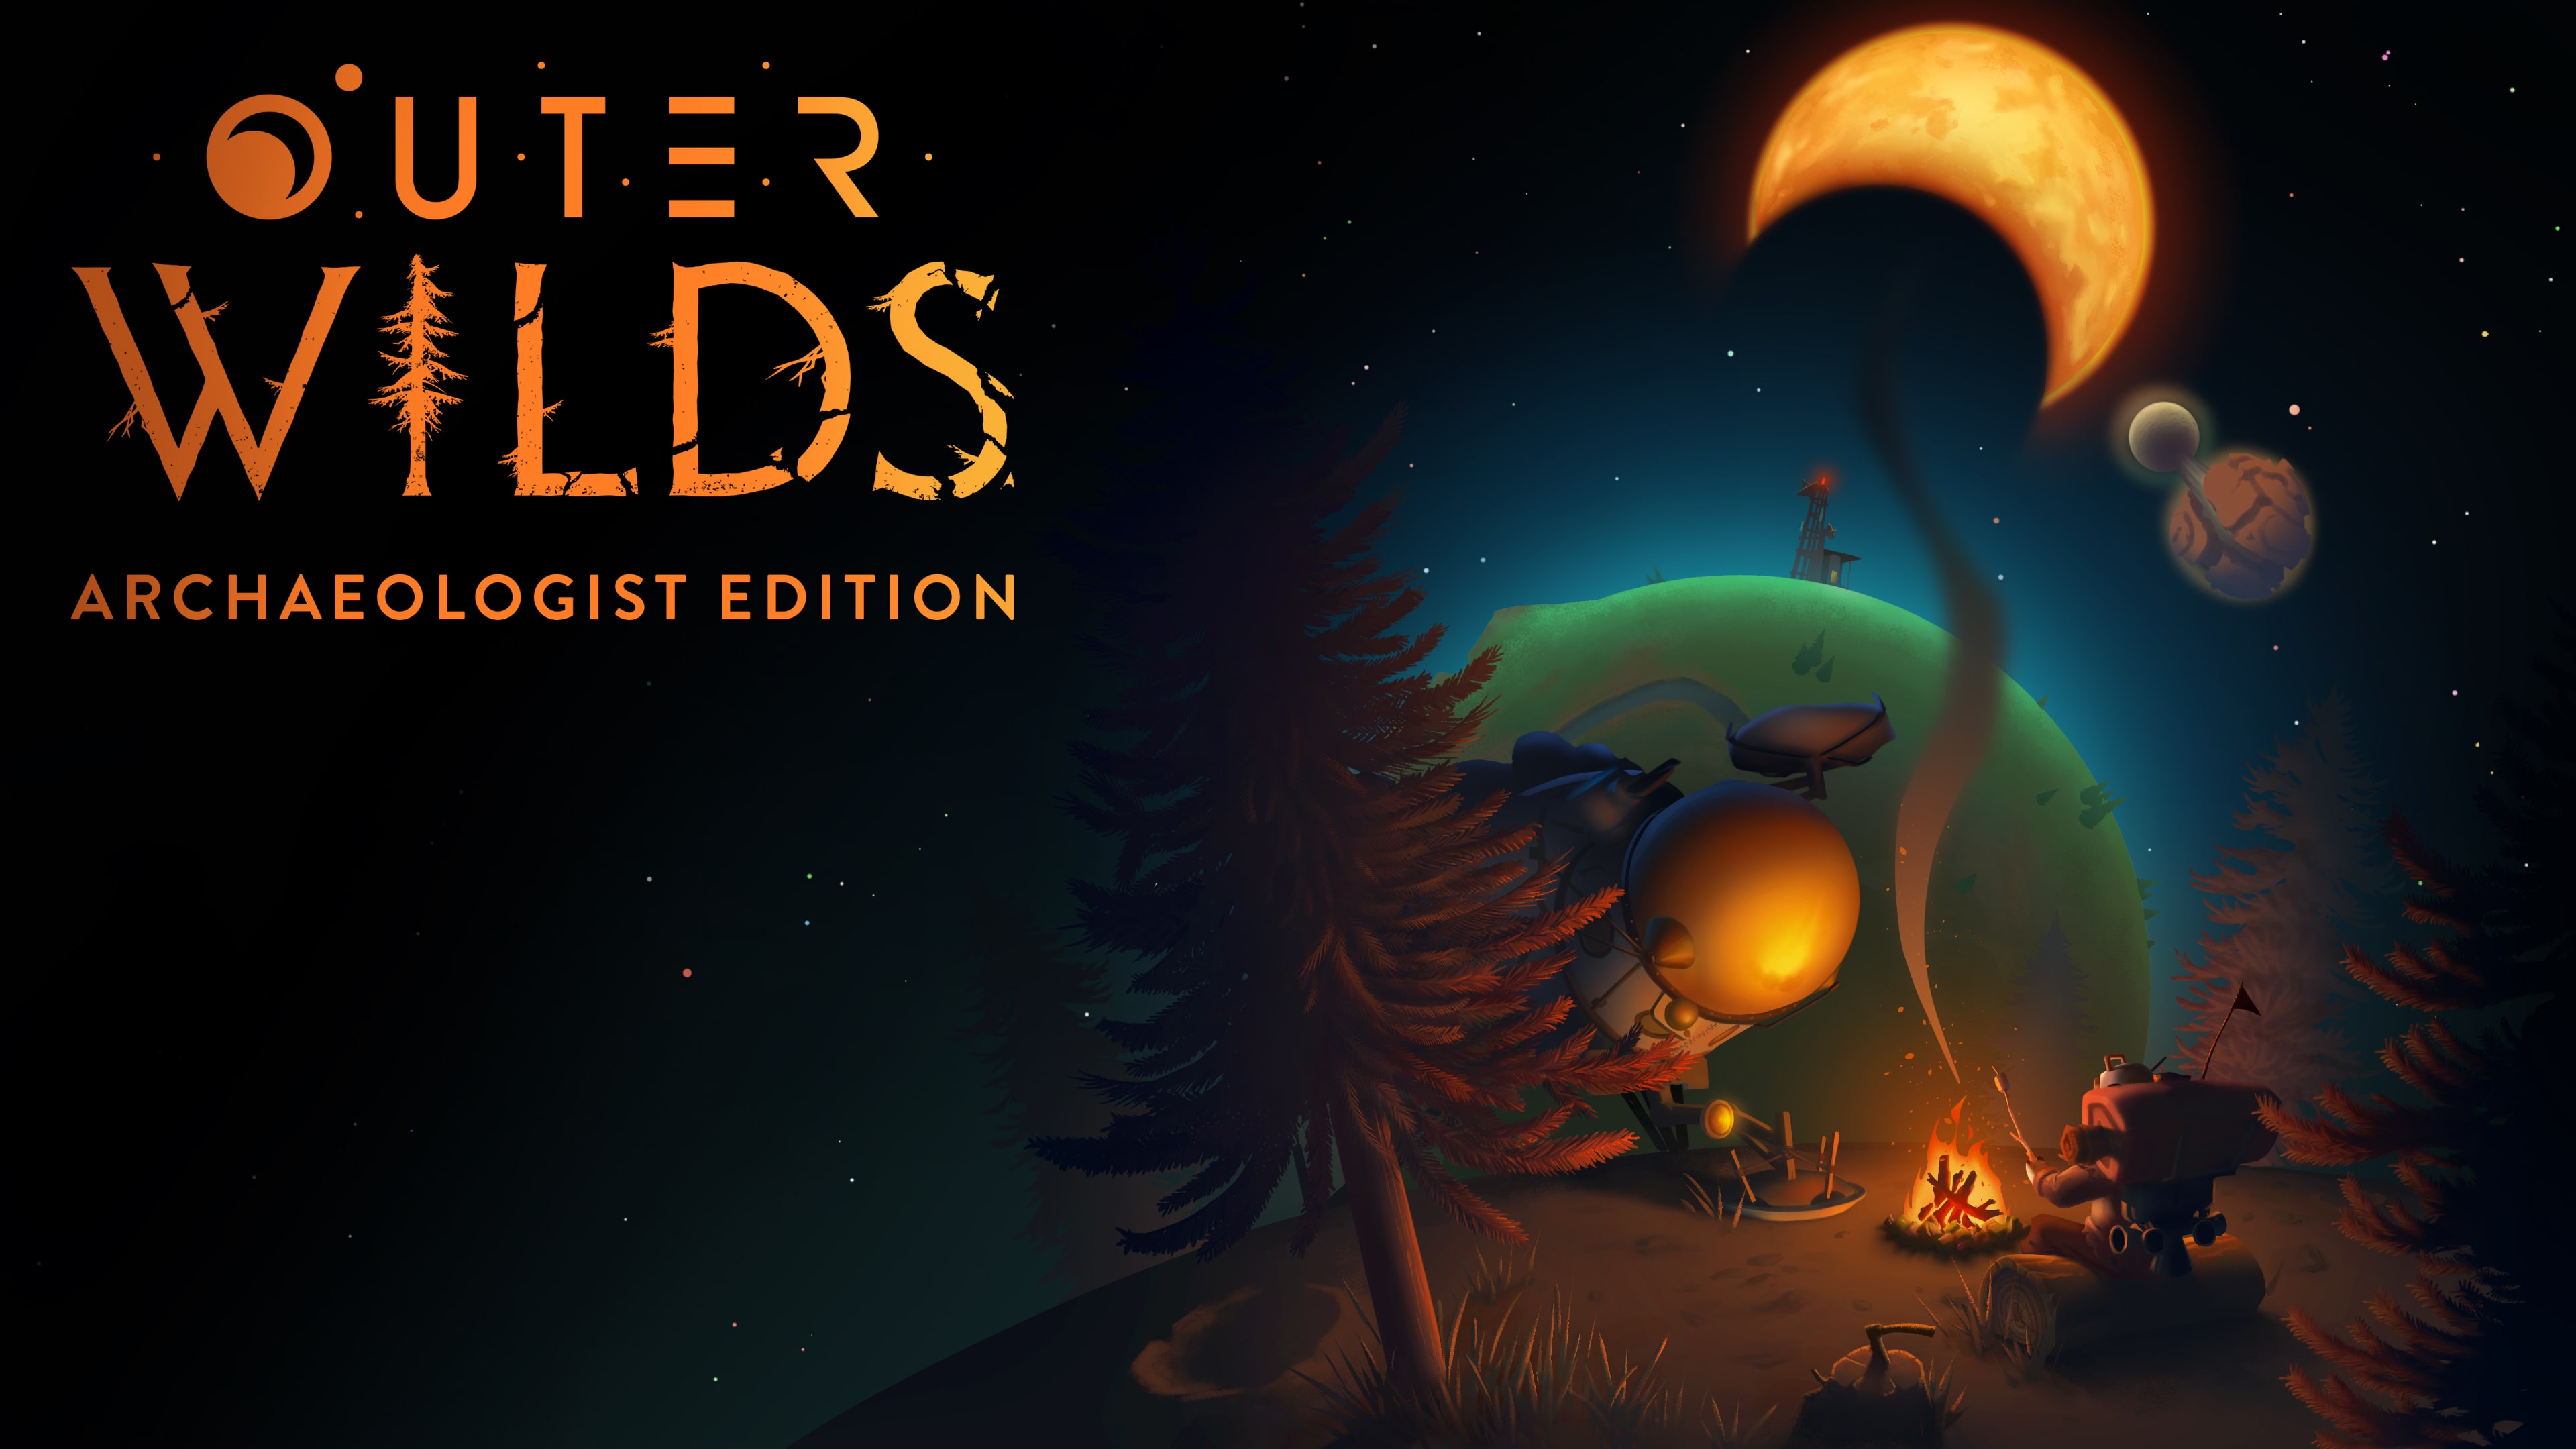 Outer Wilds: Archaeologist Edition (日语, 韩语, 简体中文, 英语)